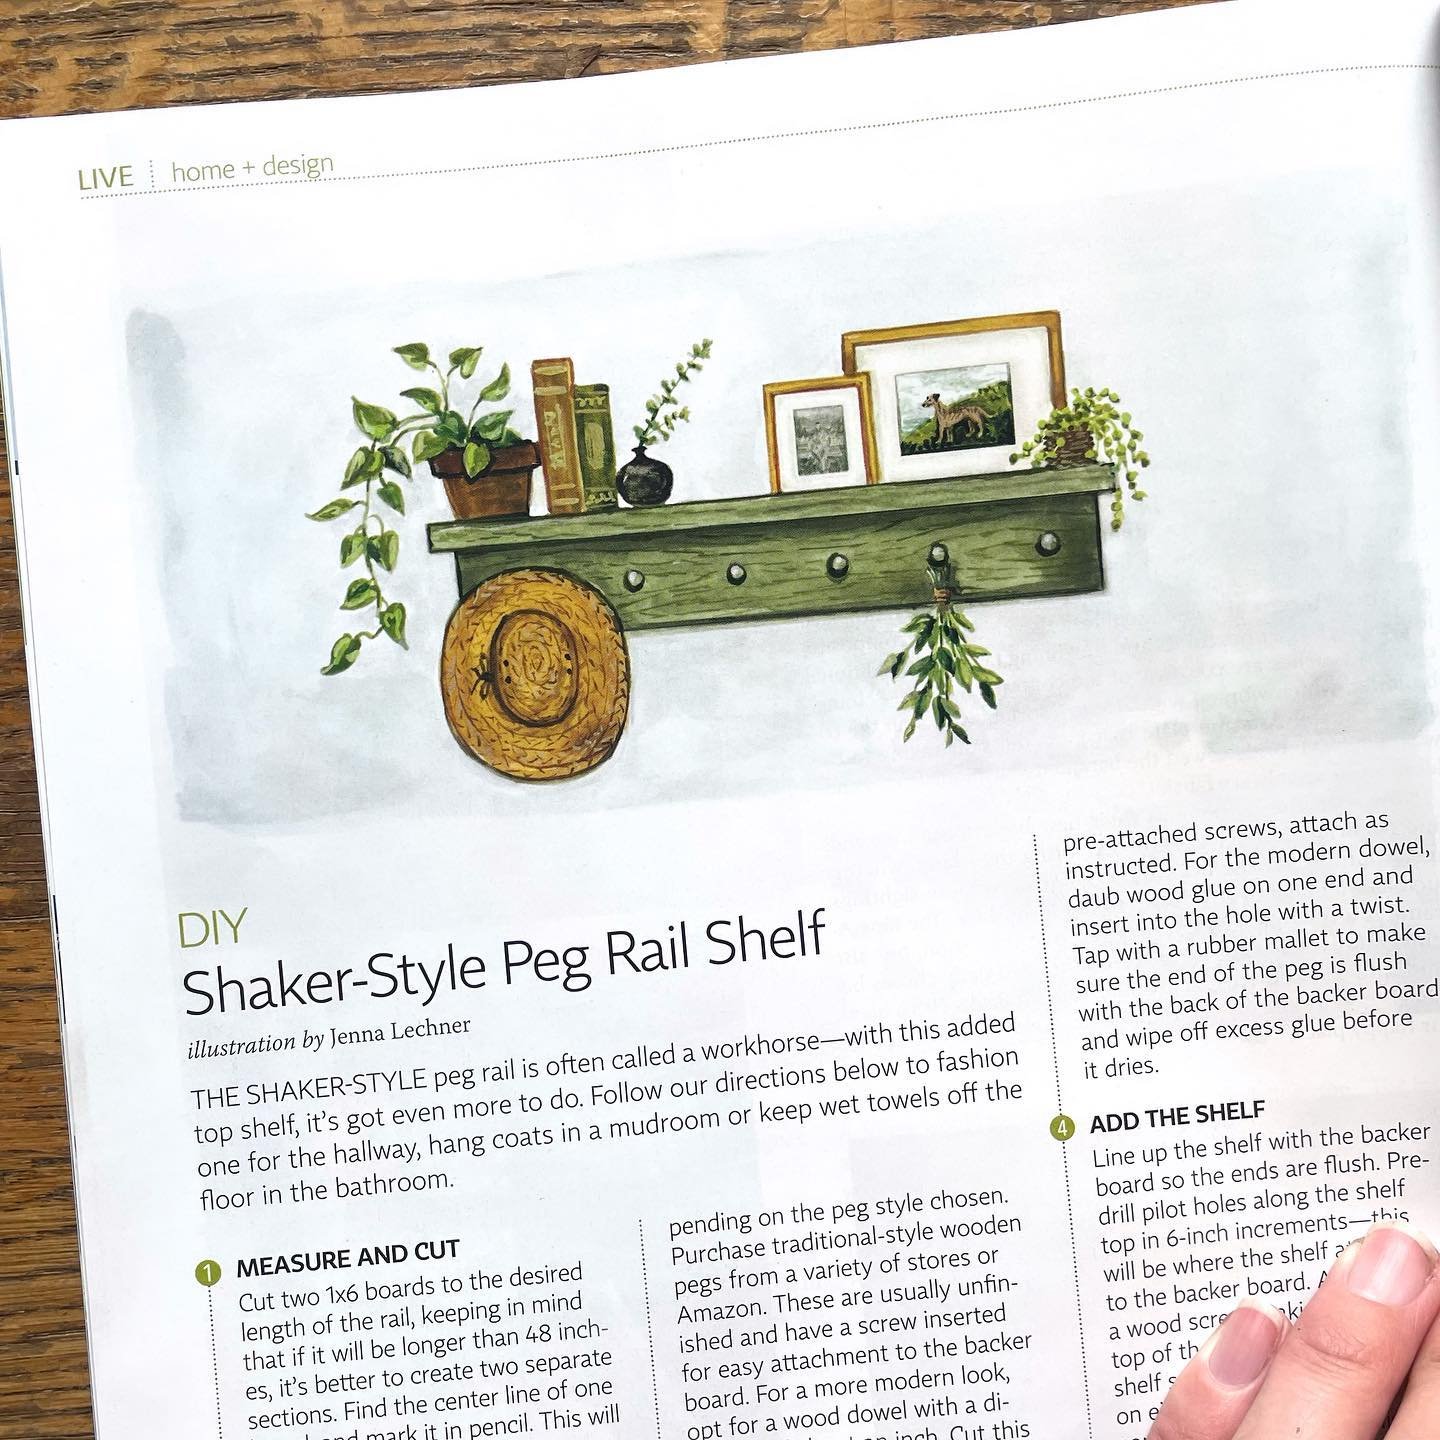 Illustration for an article on building a Shaker Peg shelf, that I did for the April/May issue of @1889washington magazine, on stands now in Washington state! Thanks to AD Allison Bye 💚 

Of course I included a tiny painting of Coco on the shelf, pl